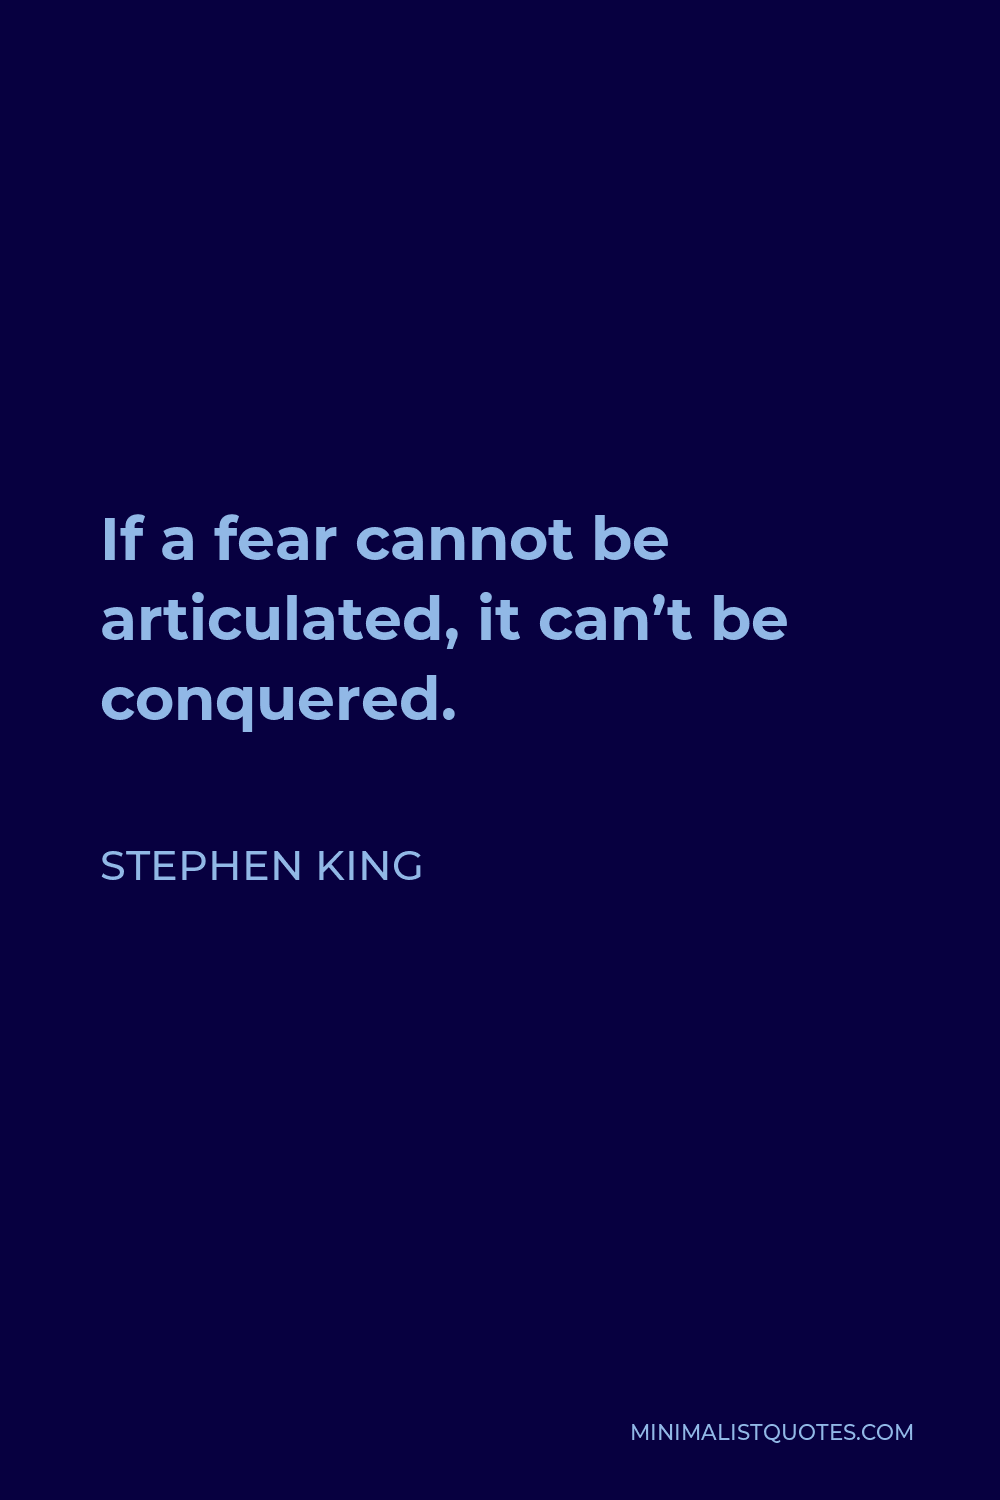 Stephen King Quote - If a fear cannot be articulated, it can’t be conquered.